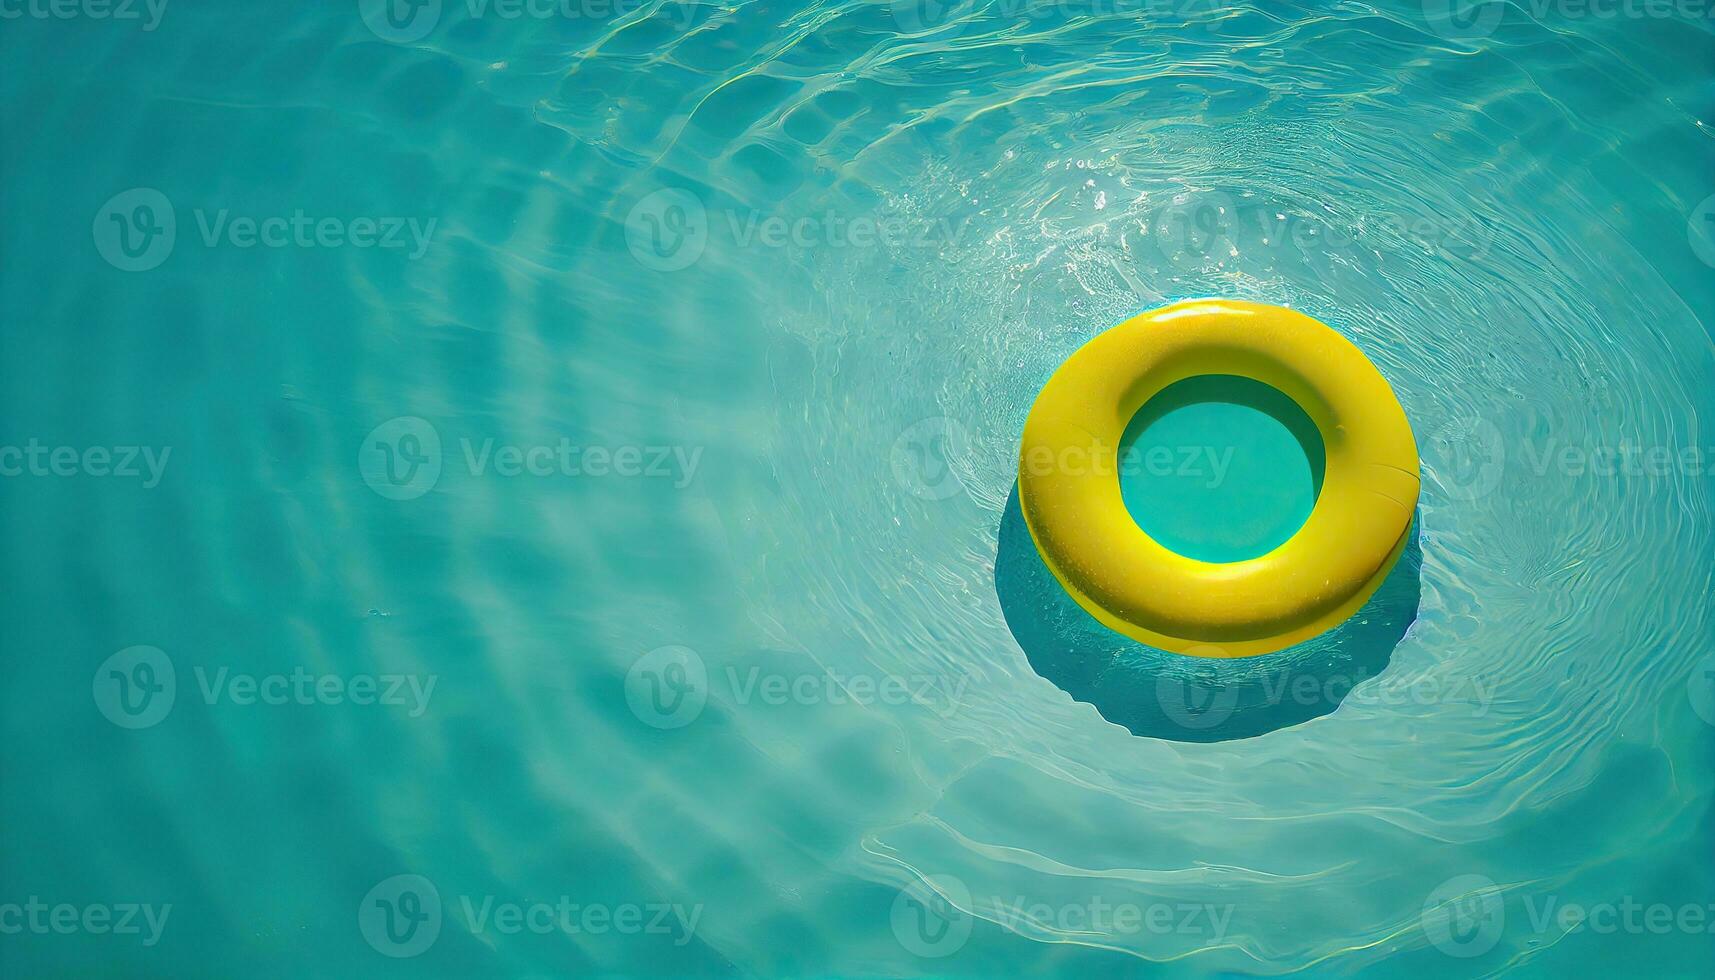 https://static.vecteezy.com/system/resources/previews/026/274/796/non_2x/generative-ai-illustration-of-water-pool-summer-background-with-pool-float-ring-summer-blue-aqua-textured-background-photo.jpg